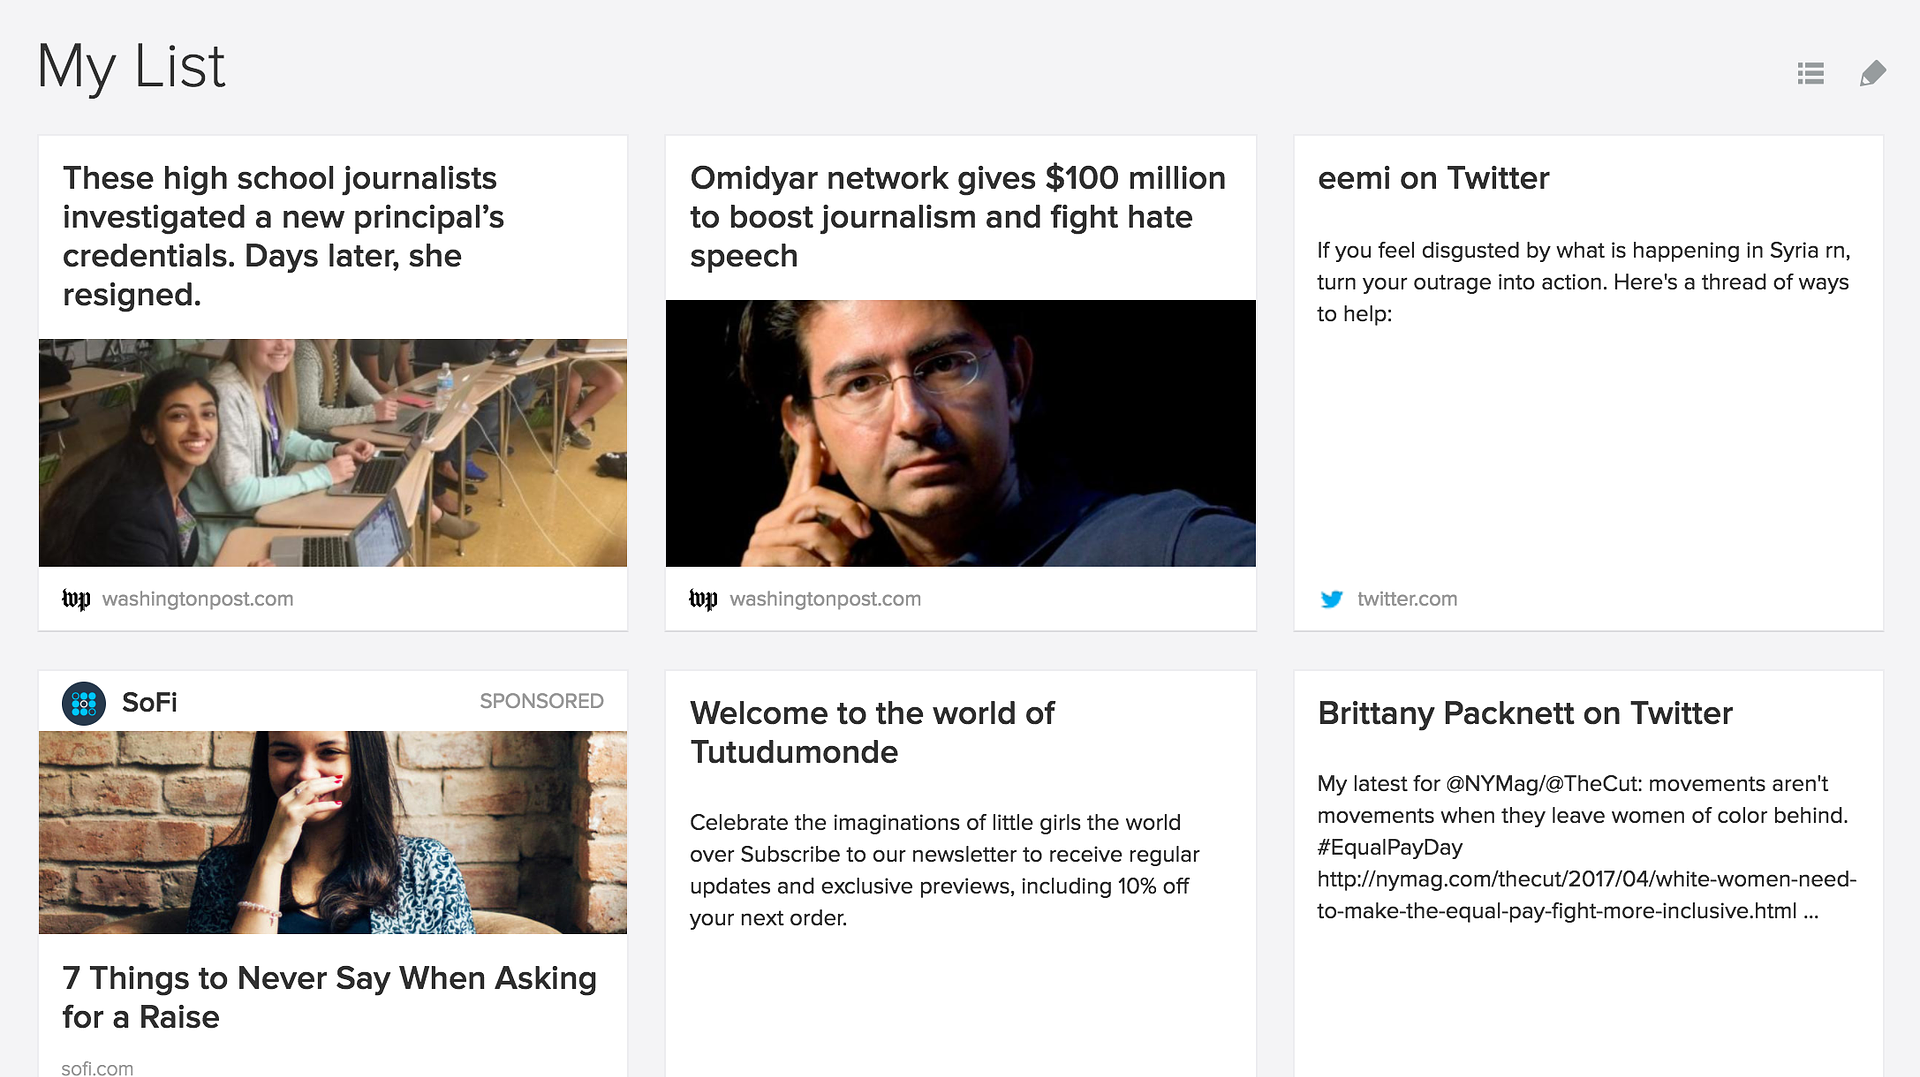 Pocket: Fantastic bookmarking service and app for saving articles and content for later